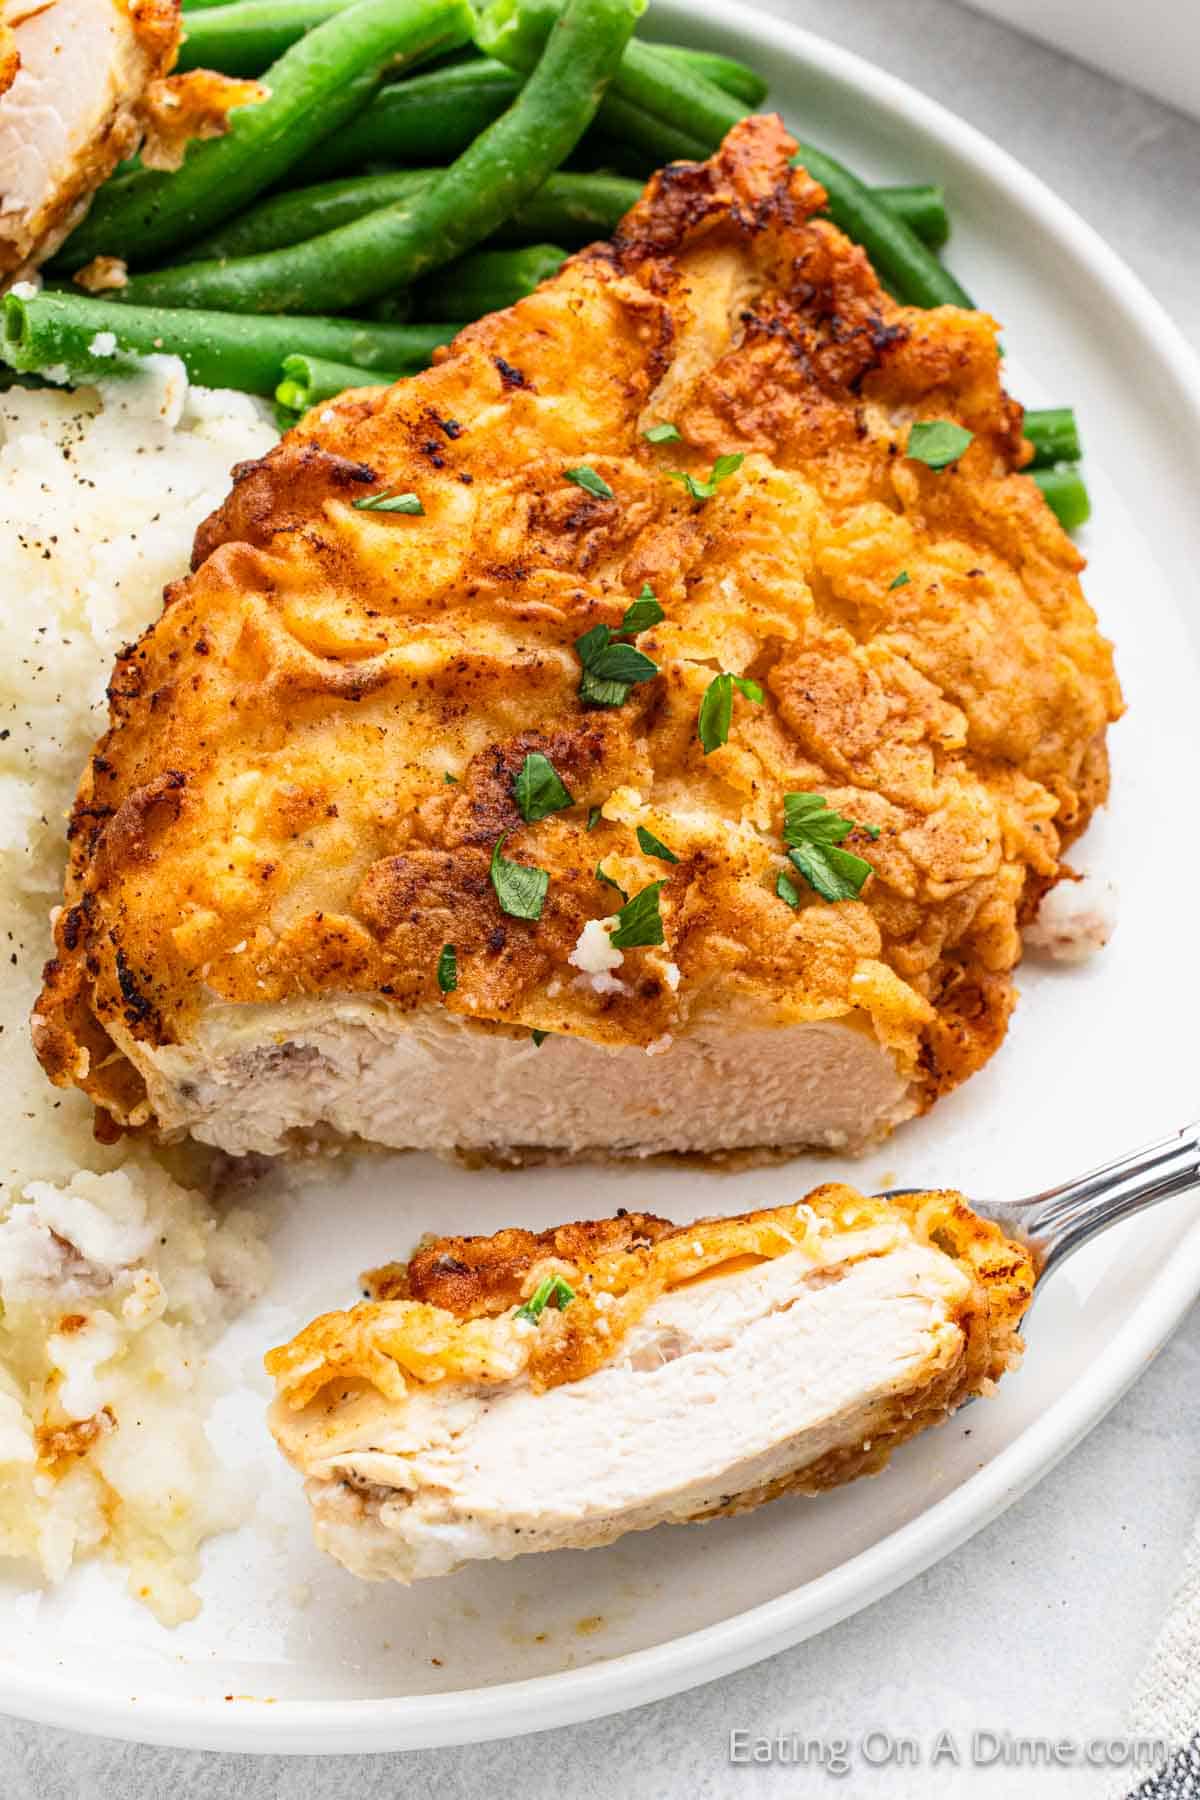 Fried chicken breast with a bite off the end that is on the fork with a side of mashed potatoes and green beans